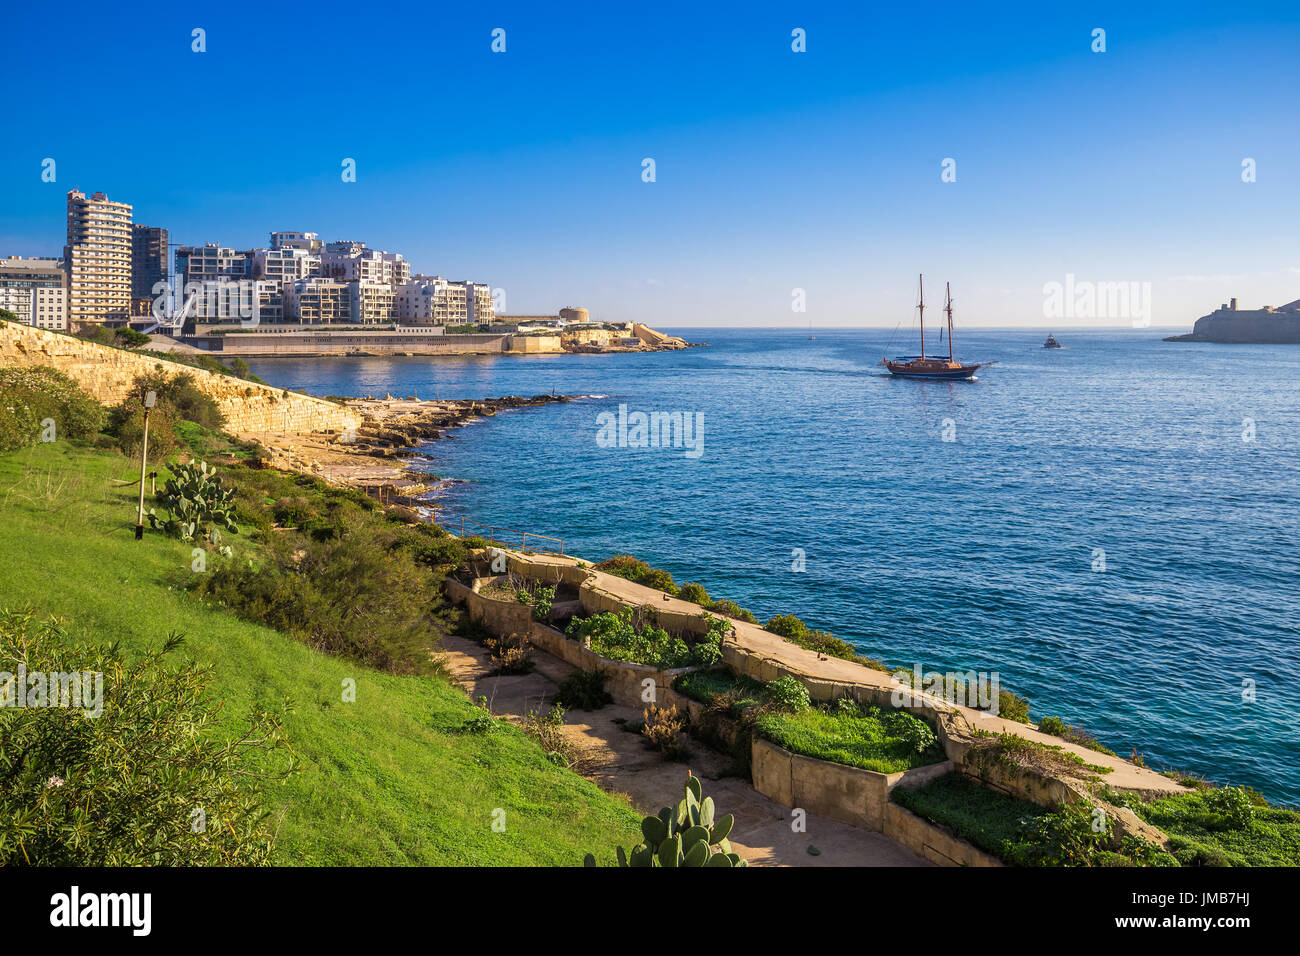 Valletta, Malta - Skyline view of Sliema at sunrise shot from Manoel island at spring time with sailing boat, blue sky and green grass Stock Photo